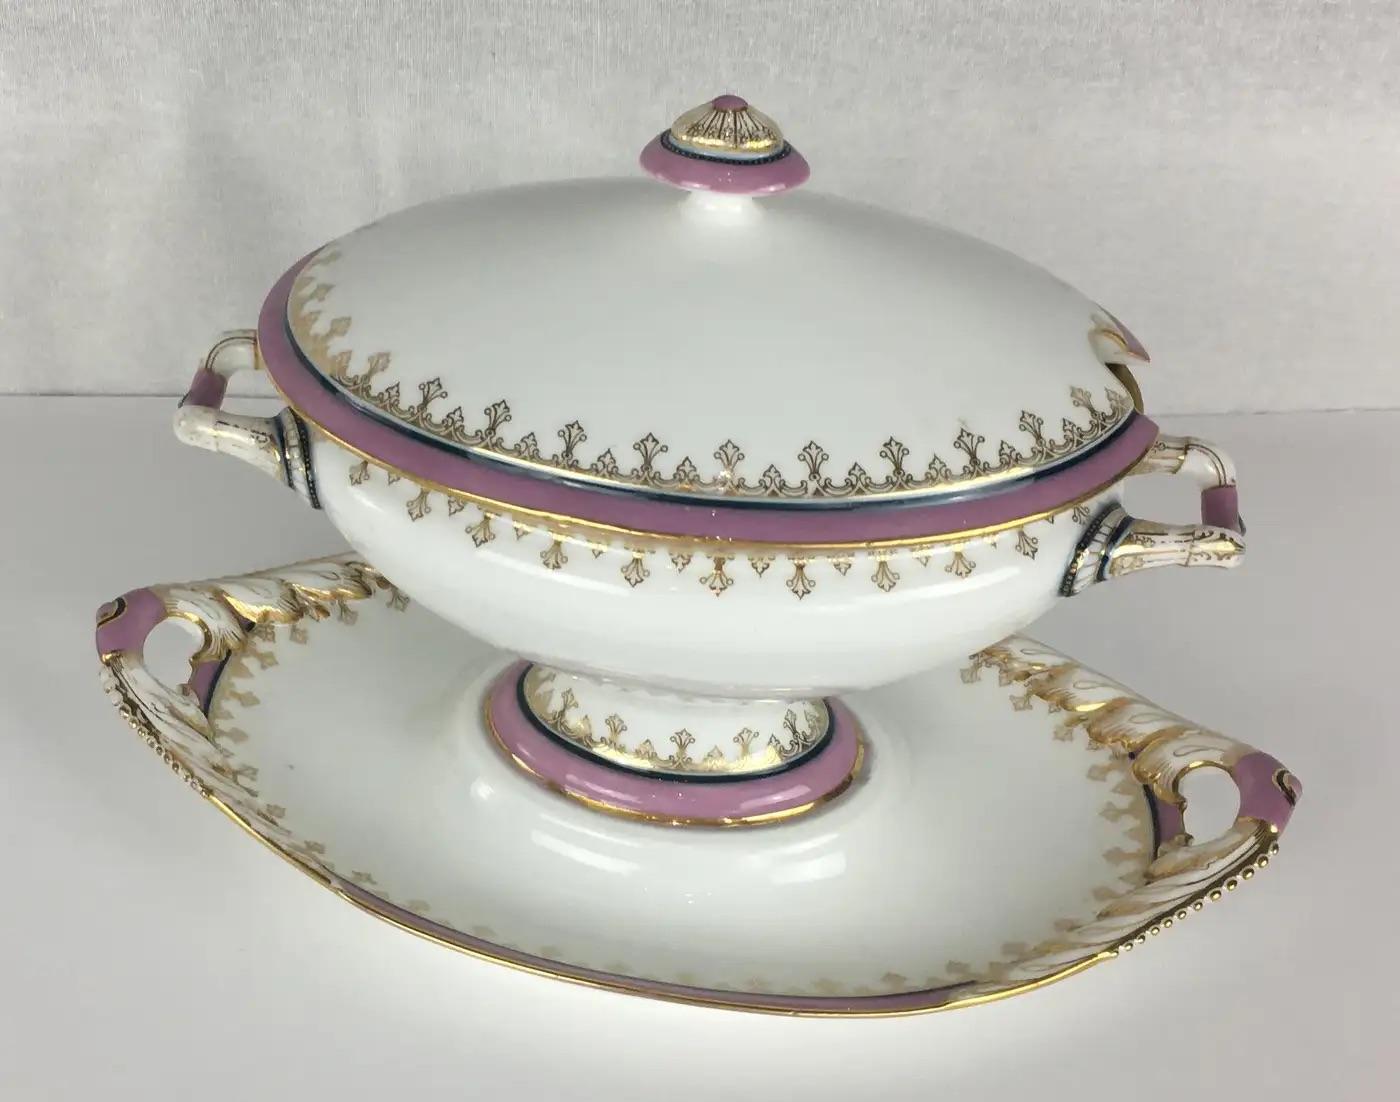 Fine antique set of 6 Limoges porcelain serving dishes. This set of serving dishes consists of two large platters, one serving dish, one cake plate, one gravy boat and one sauce bowl, all in excellent condition. 

Every item has a decorated rim with